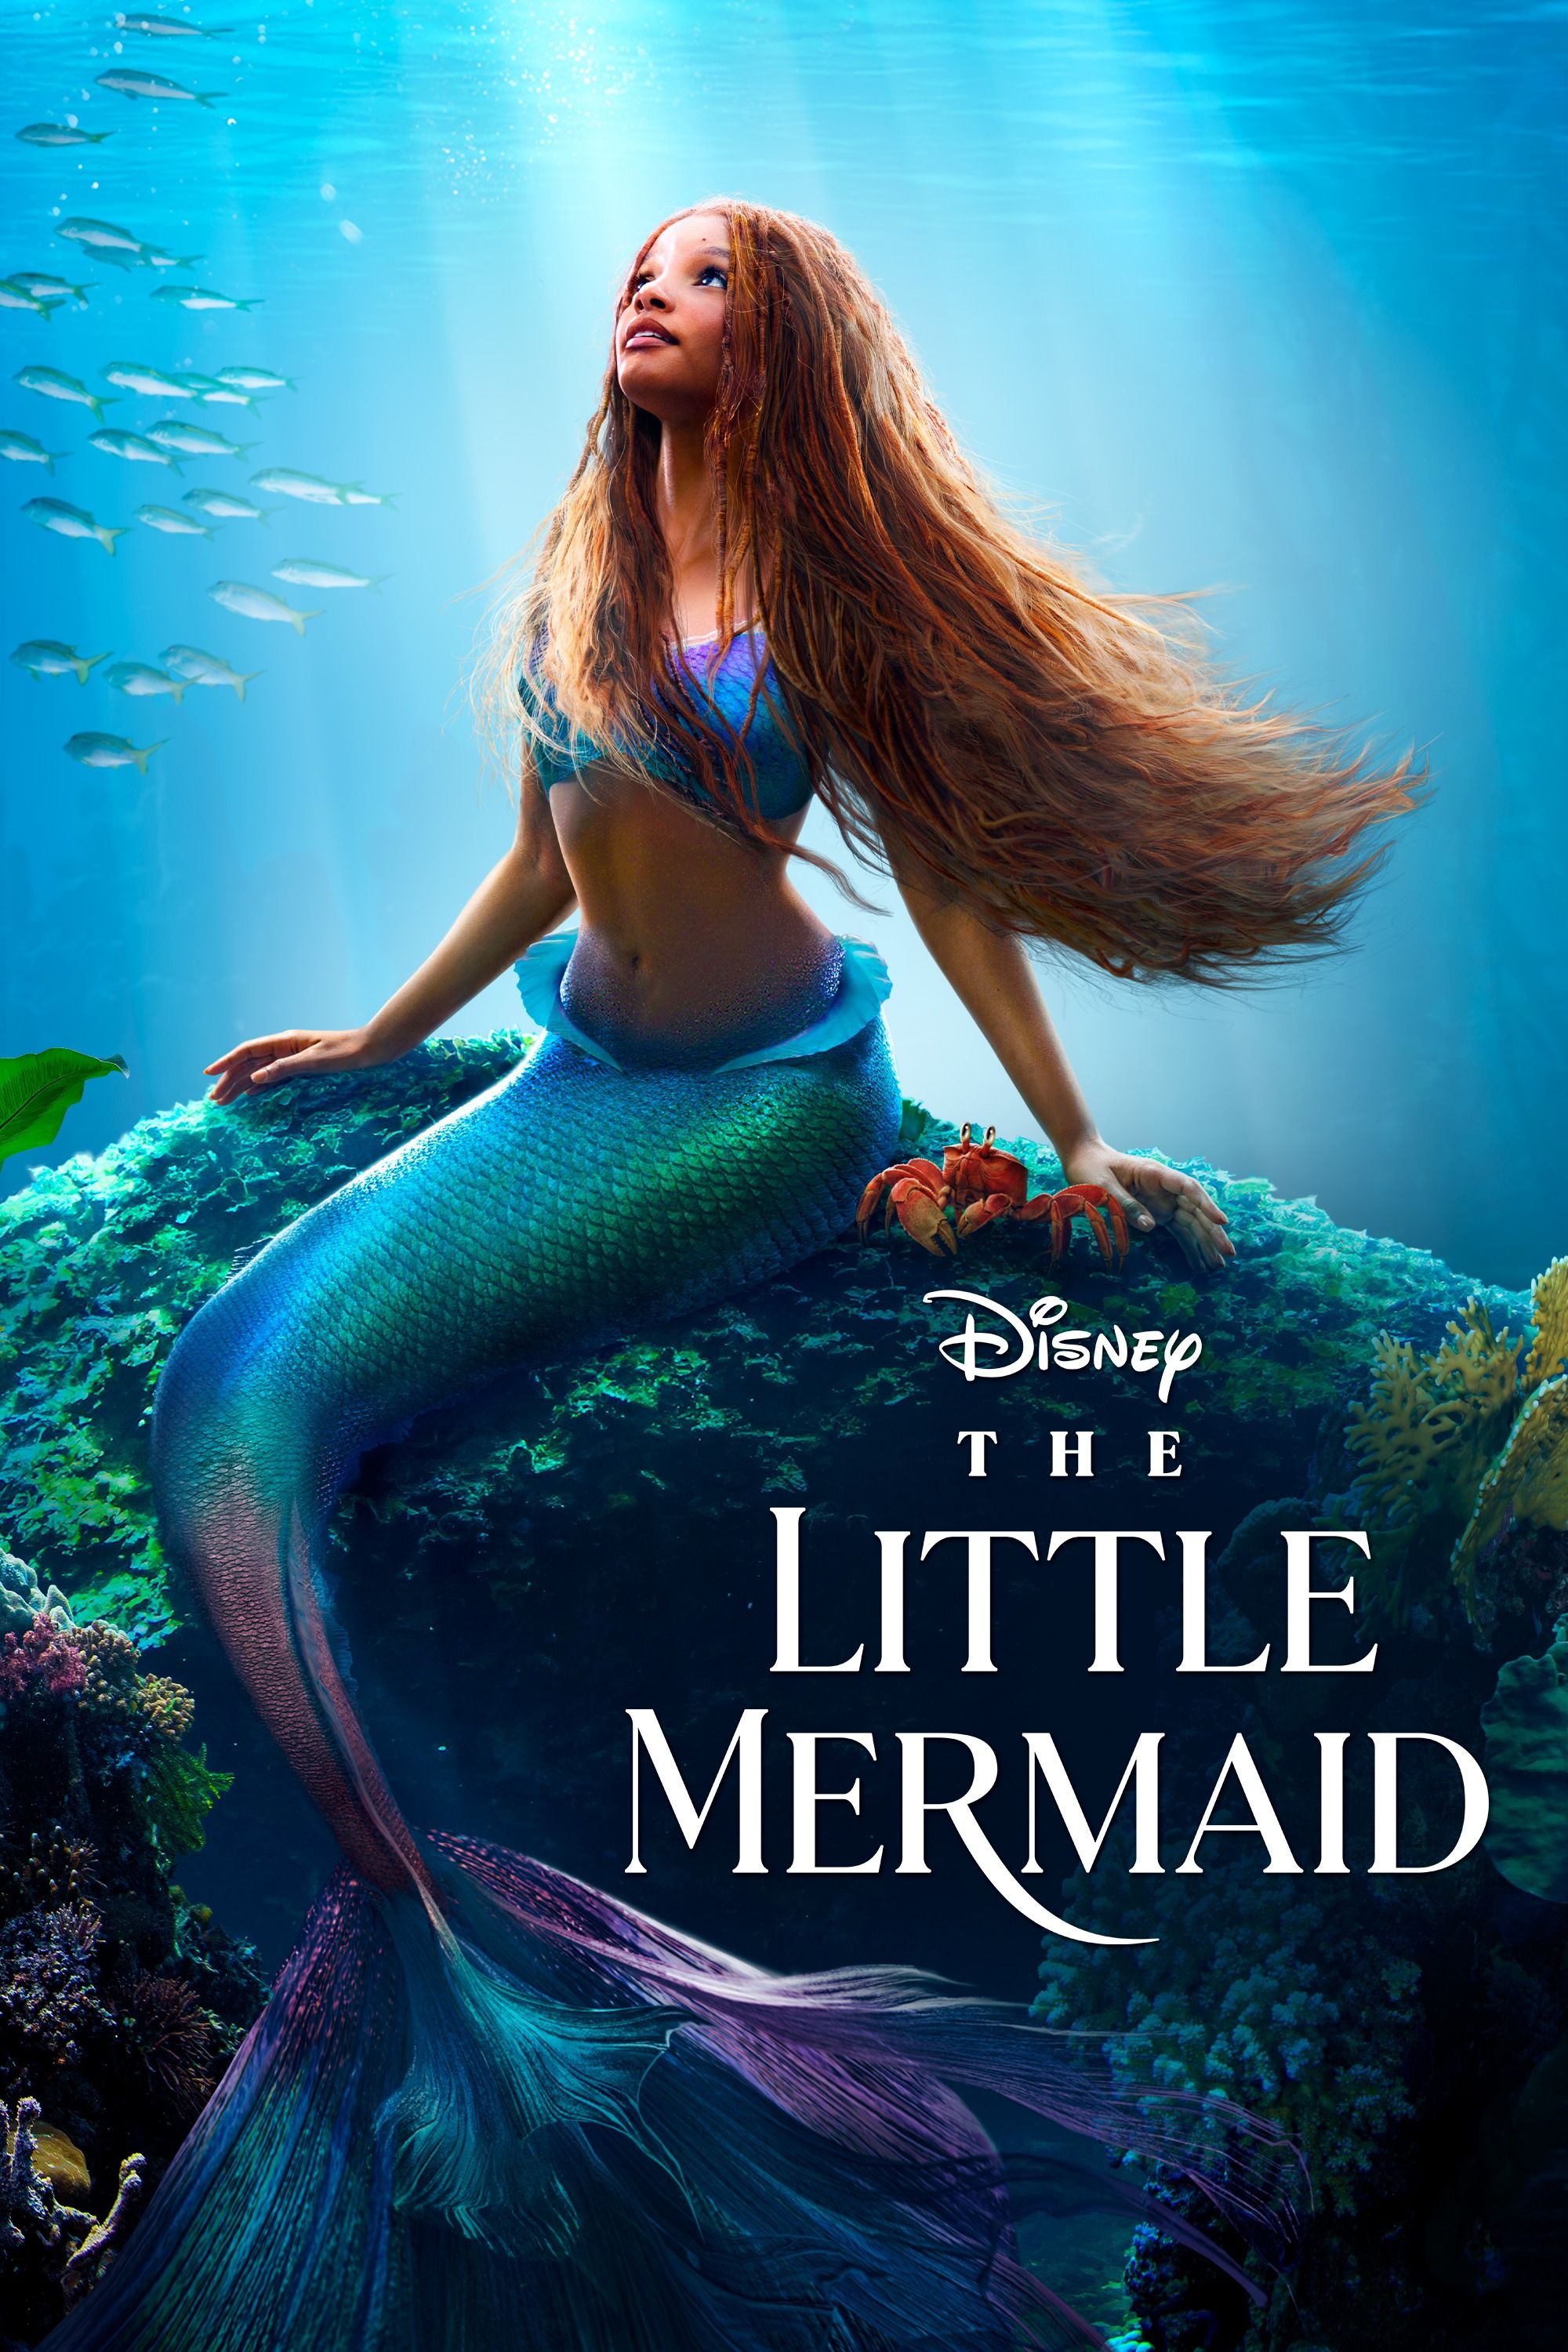 Image of the little mermaid movie poster